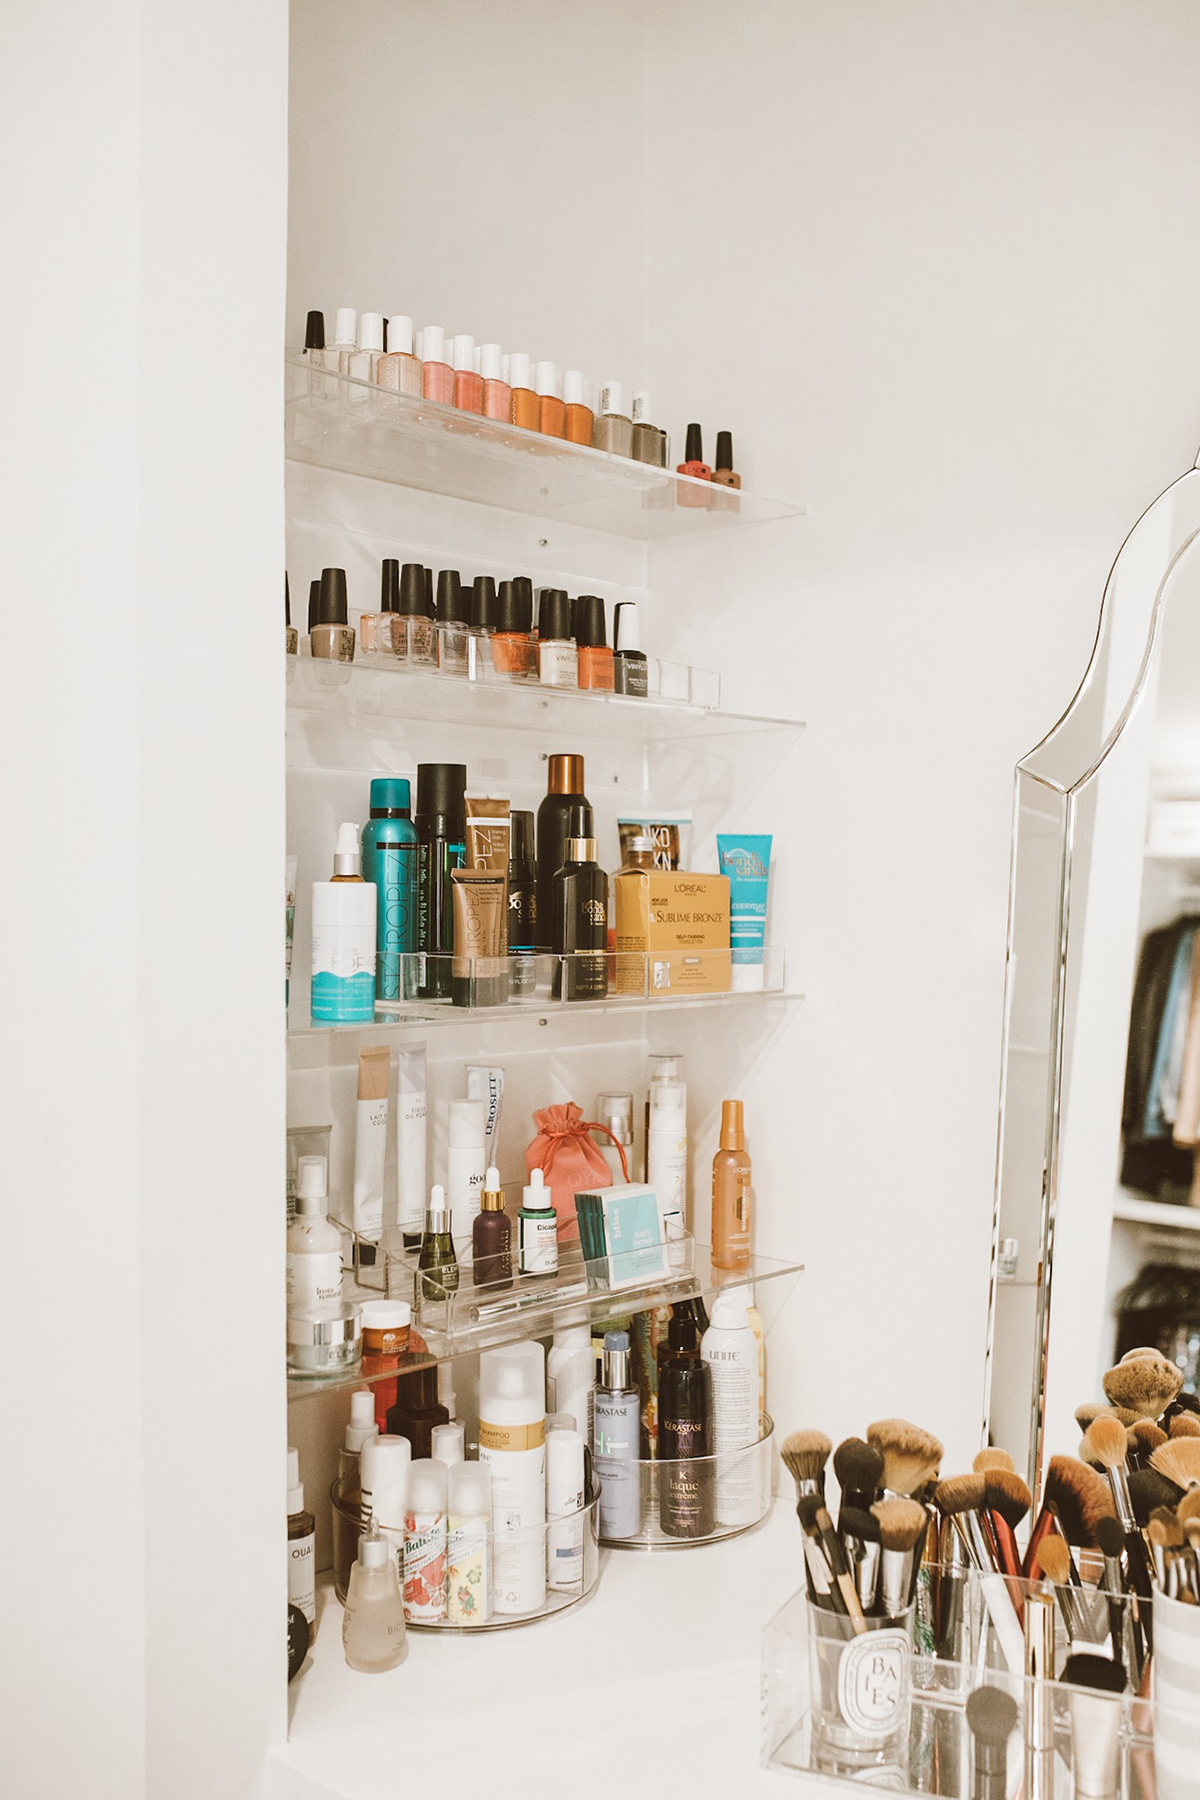 blogger So Sage used lucite organizers from the Container Store to organize her vanity area